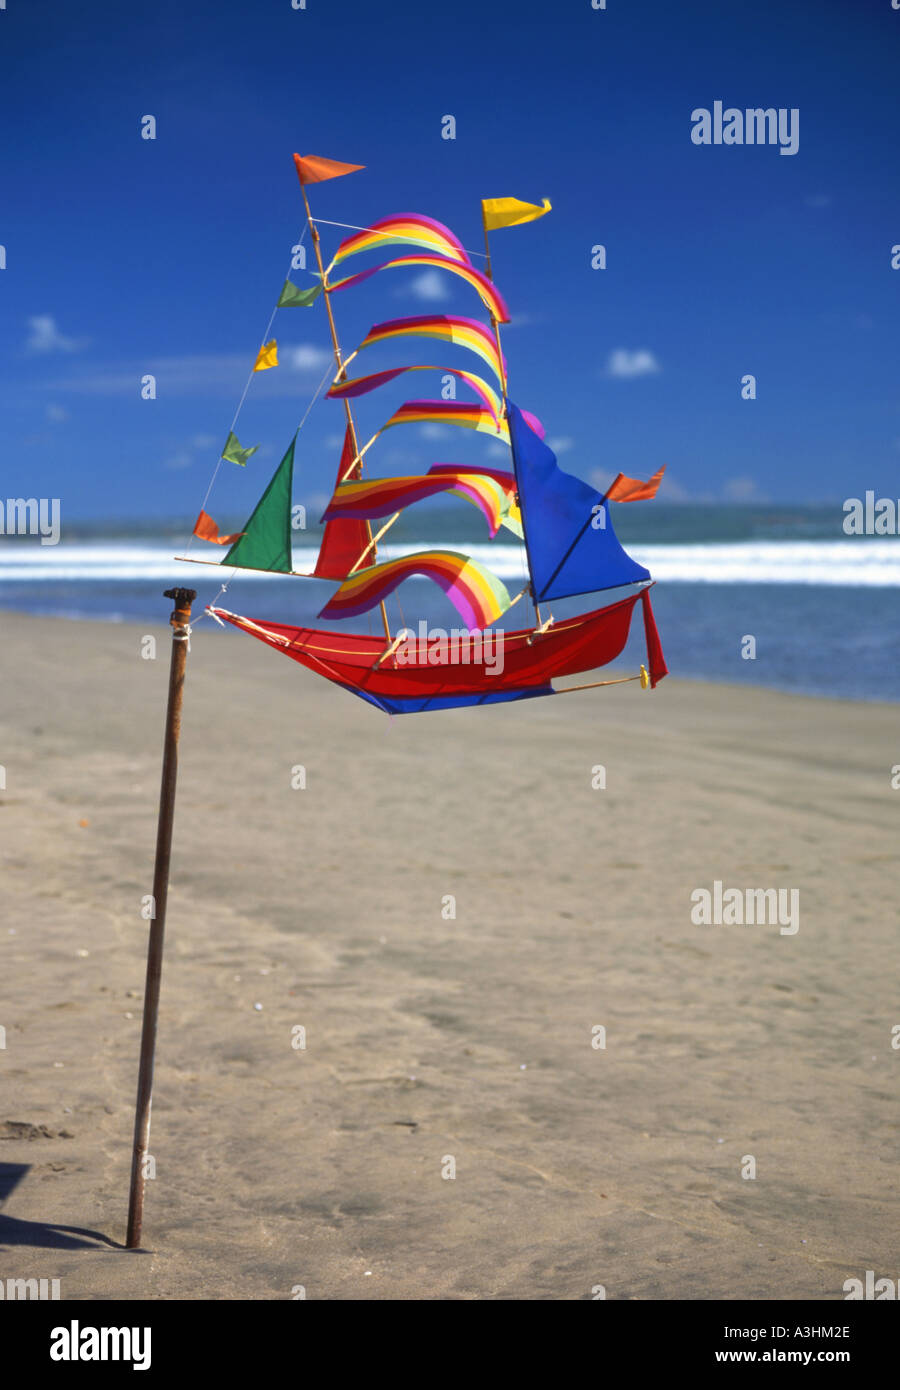 Brightly coloured kite in the shape of a ship for sale on Kuta beach Bali Indonesia Stock Photo